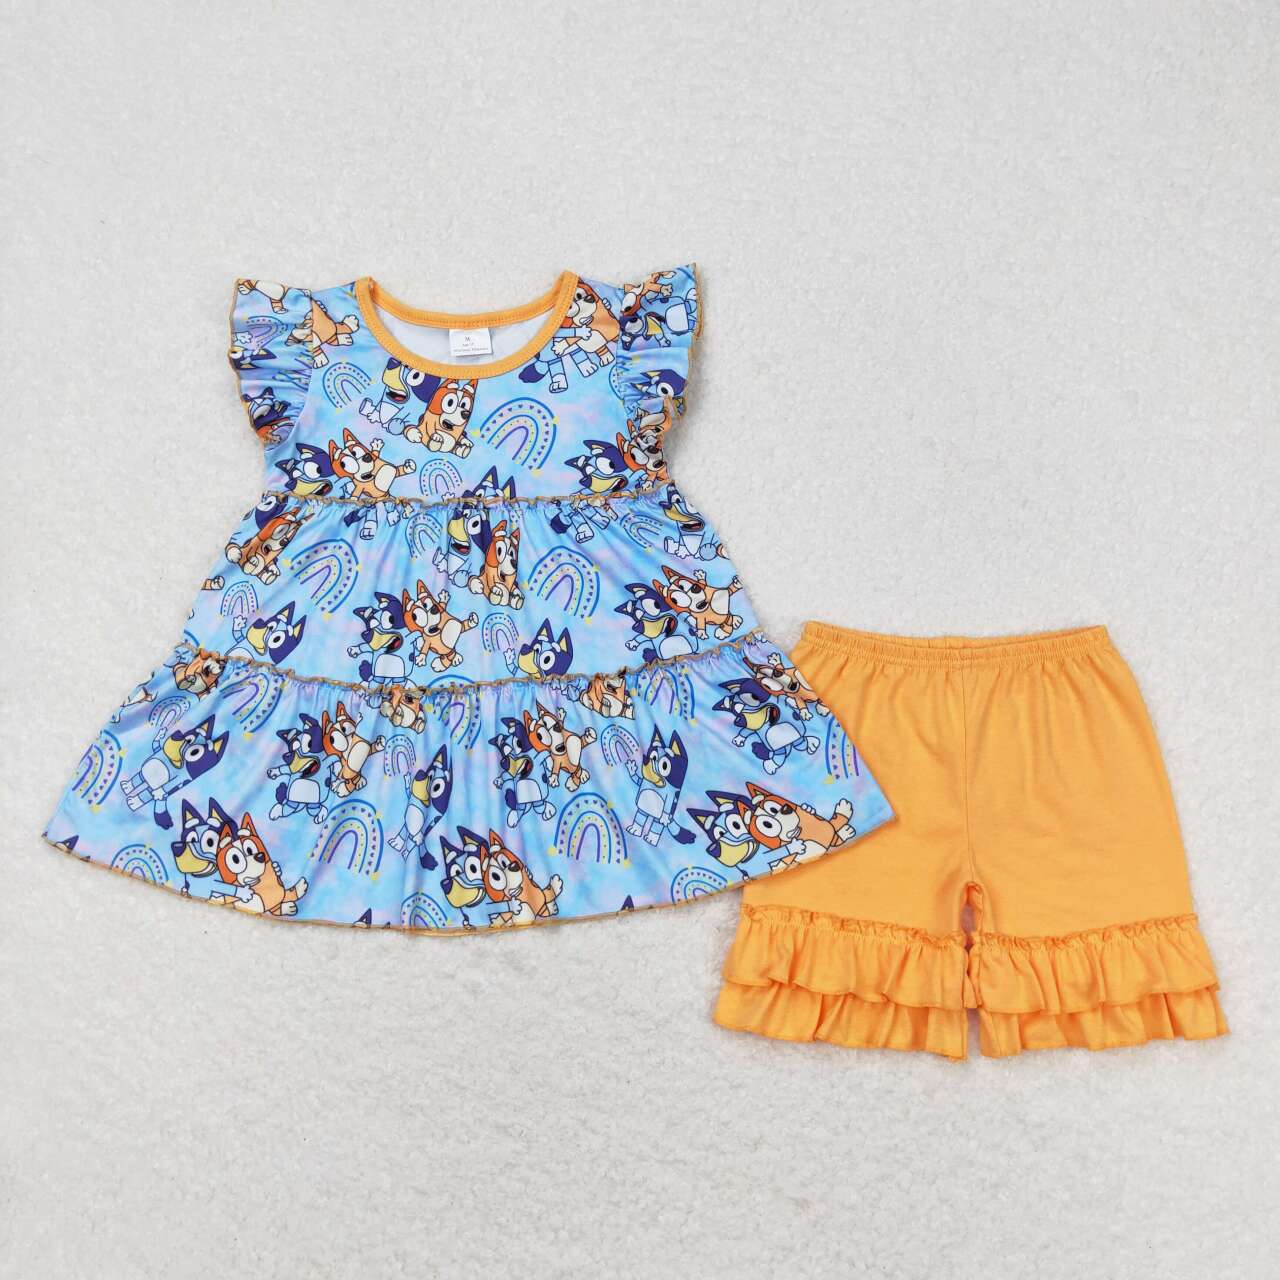 GSSO0632  Kids Girls summer clothes short sleeve top with shorts set